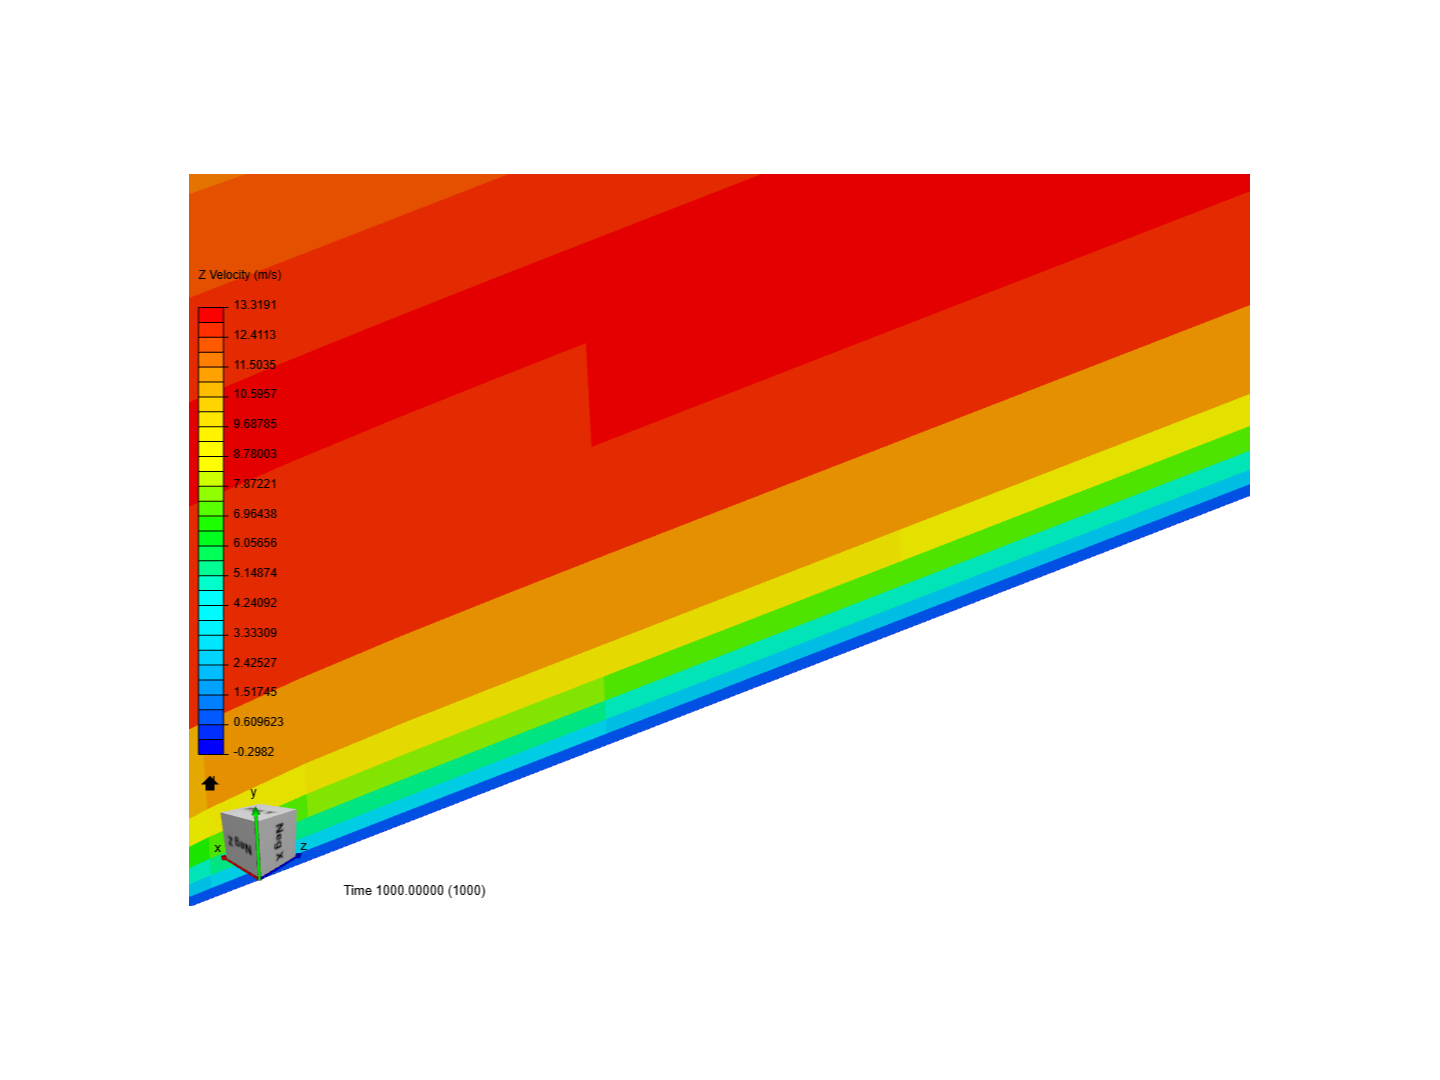 CFD 2 - Boundary Layer Flow image